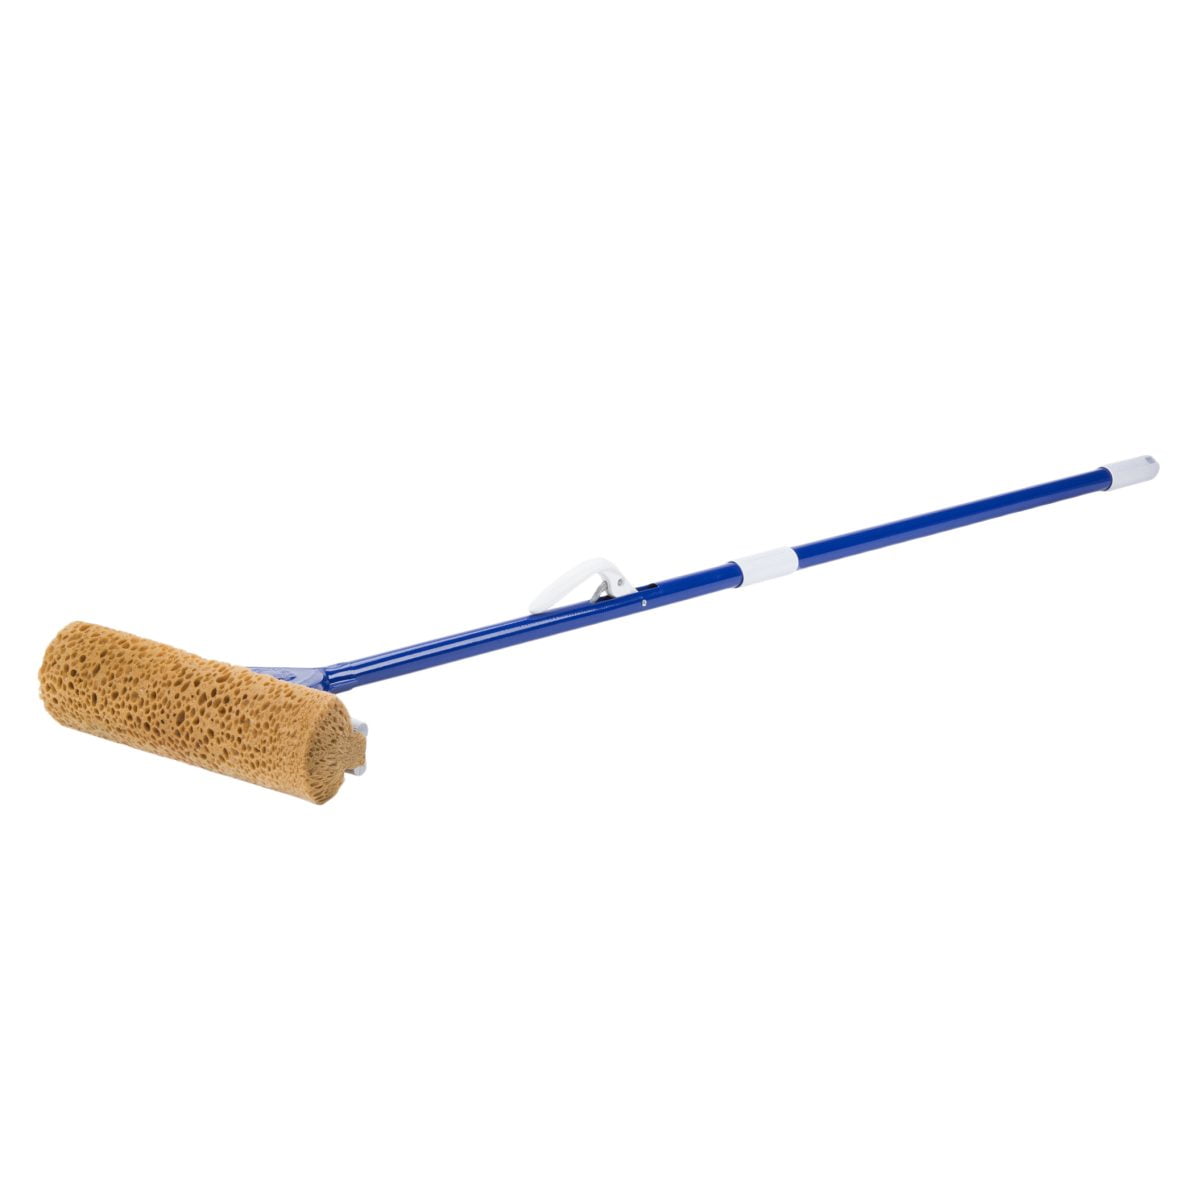 Integrity Cellulose Sponge Mop with Handle